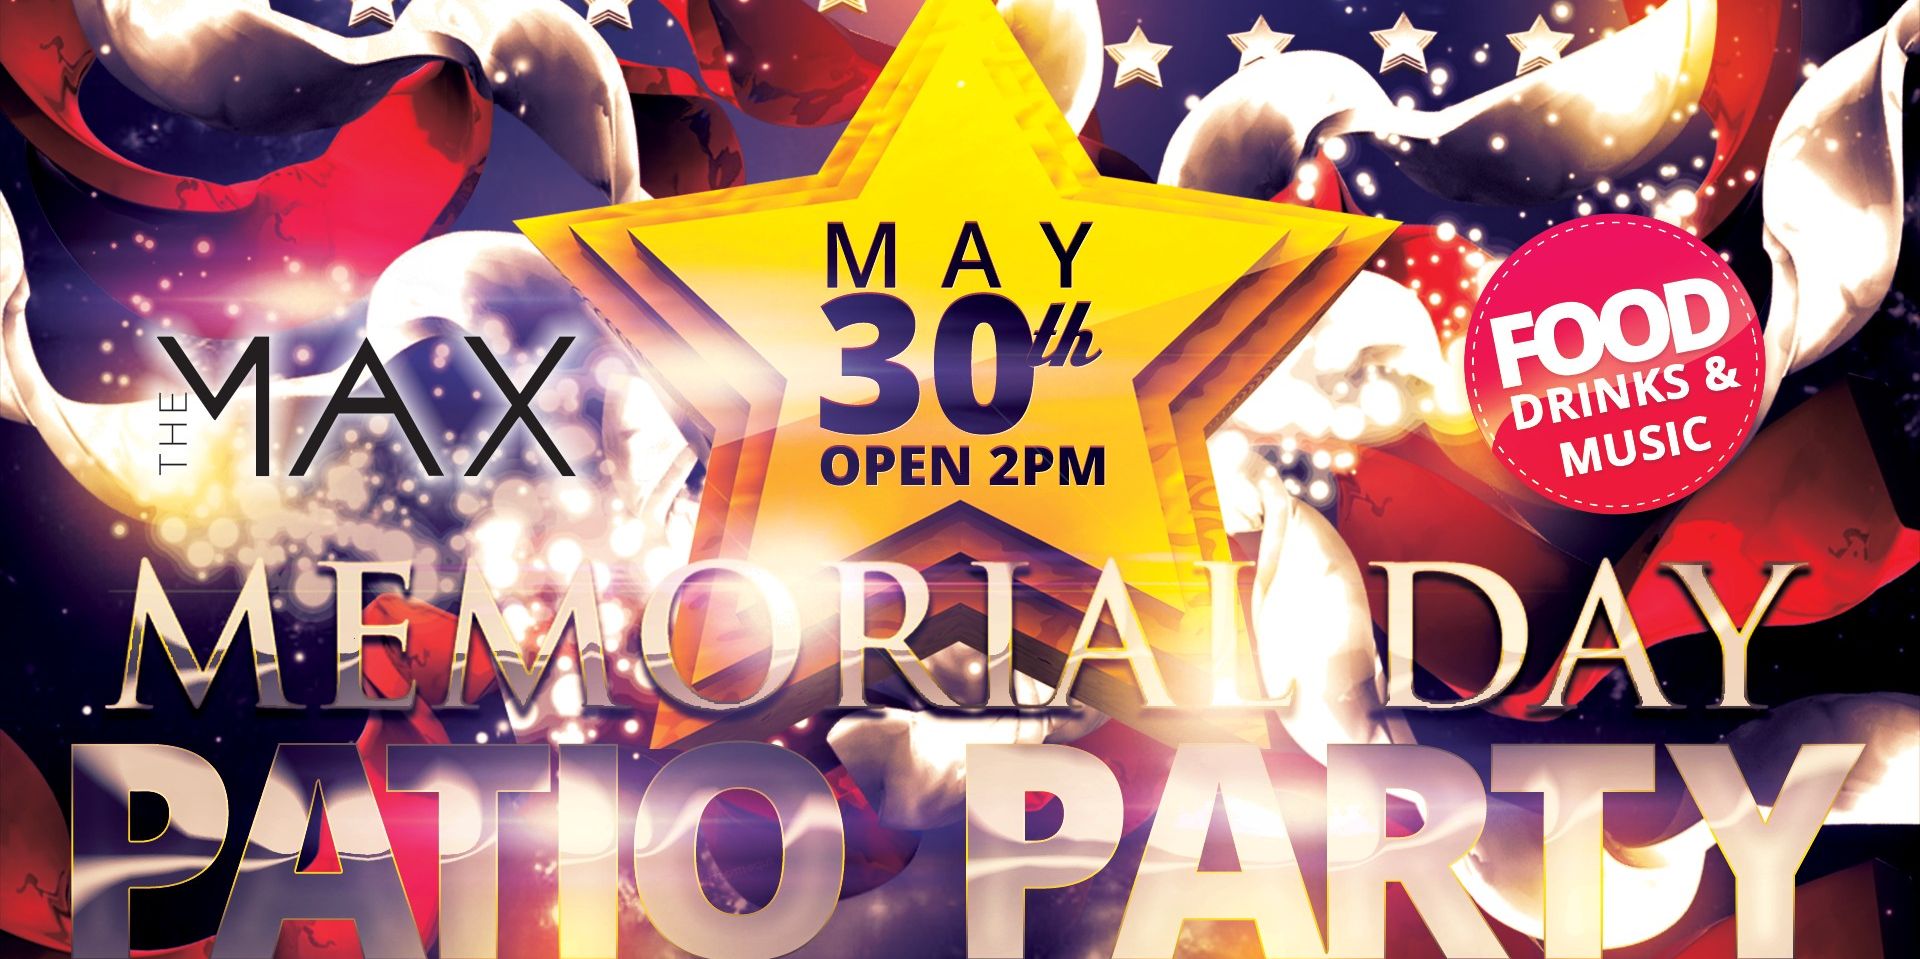 Memorial Day Patio Party promotional image